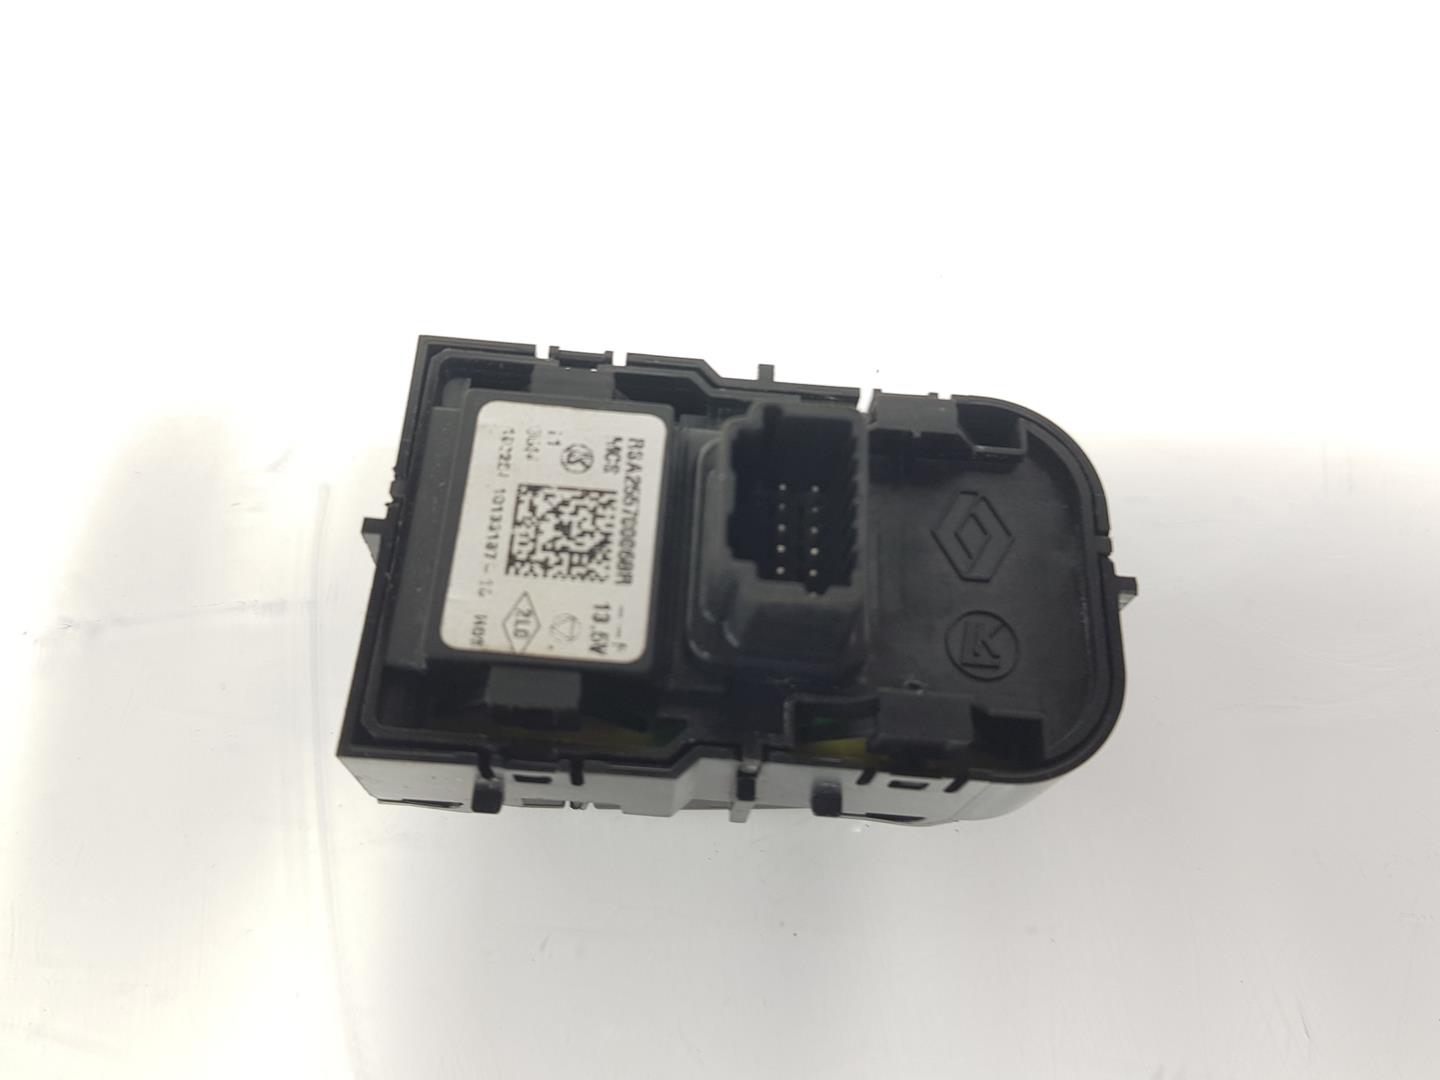 RENAULT Clio 3 generation (2005-2012) Other Control Units 255700068R, 255700068R 19789212